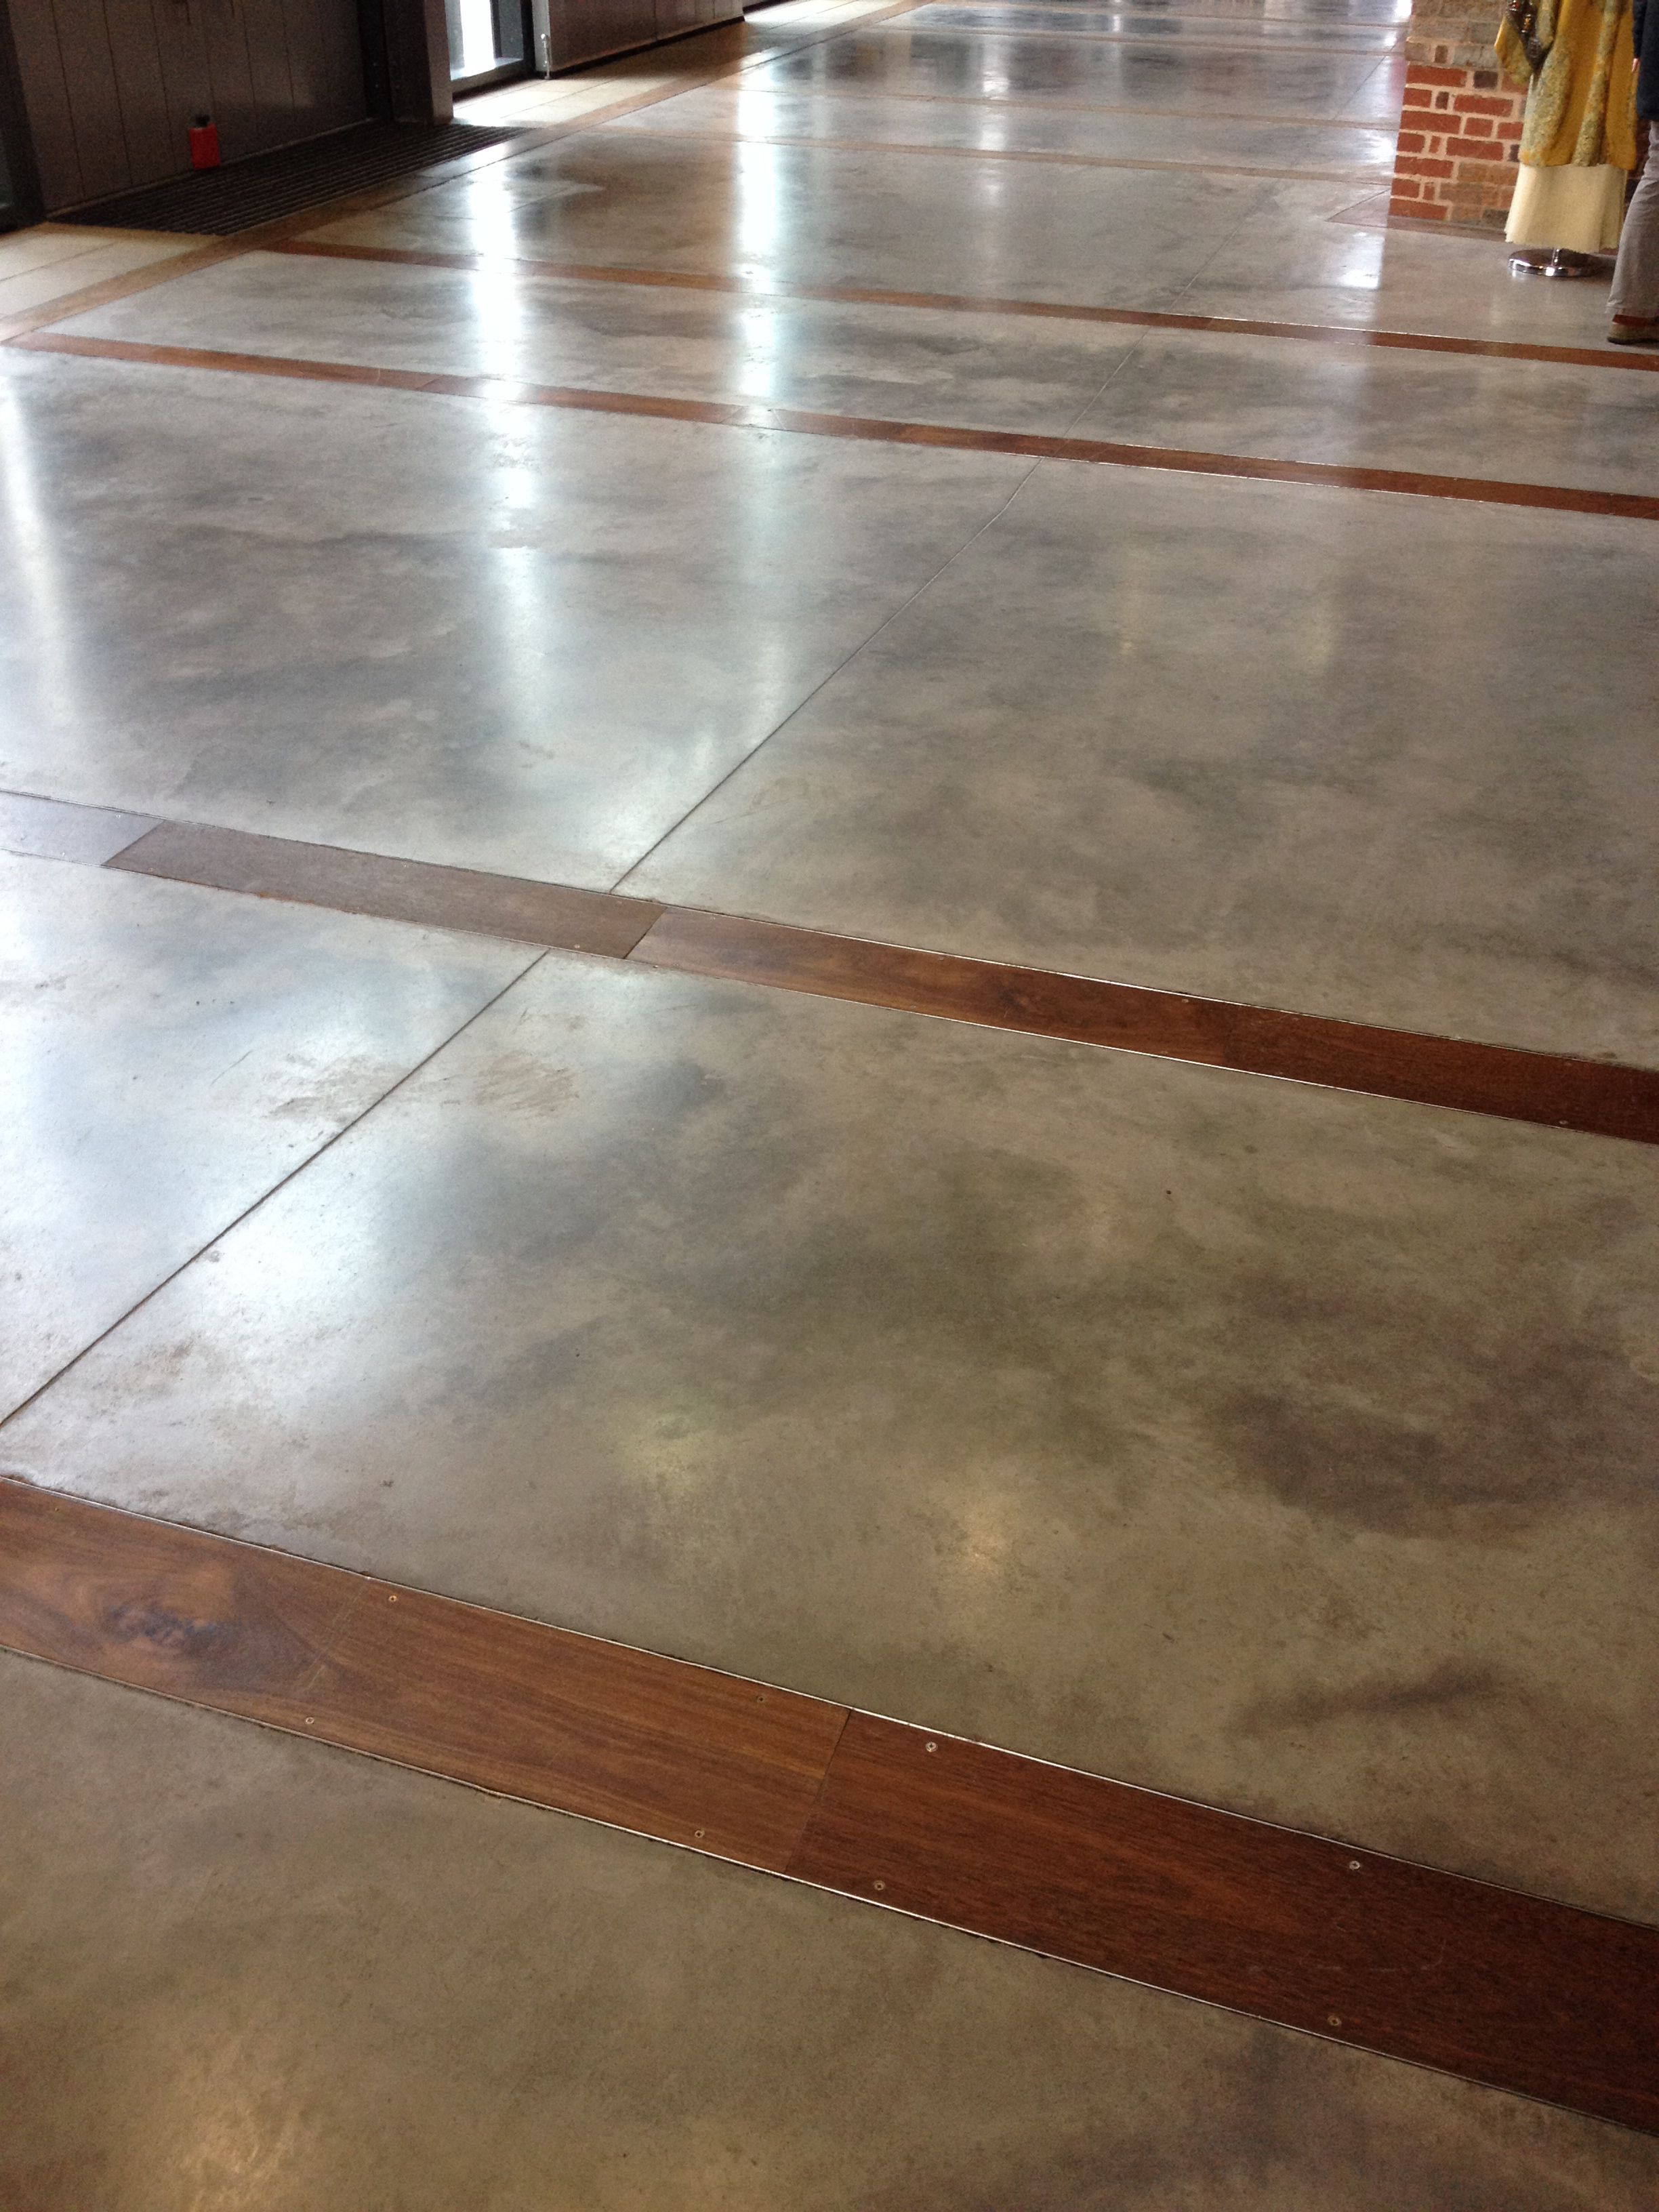 Concrete Floors With Wood Inlay Oxidos Concrete Floors pertaining to sizing 2448 X 3264